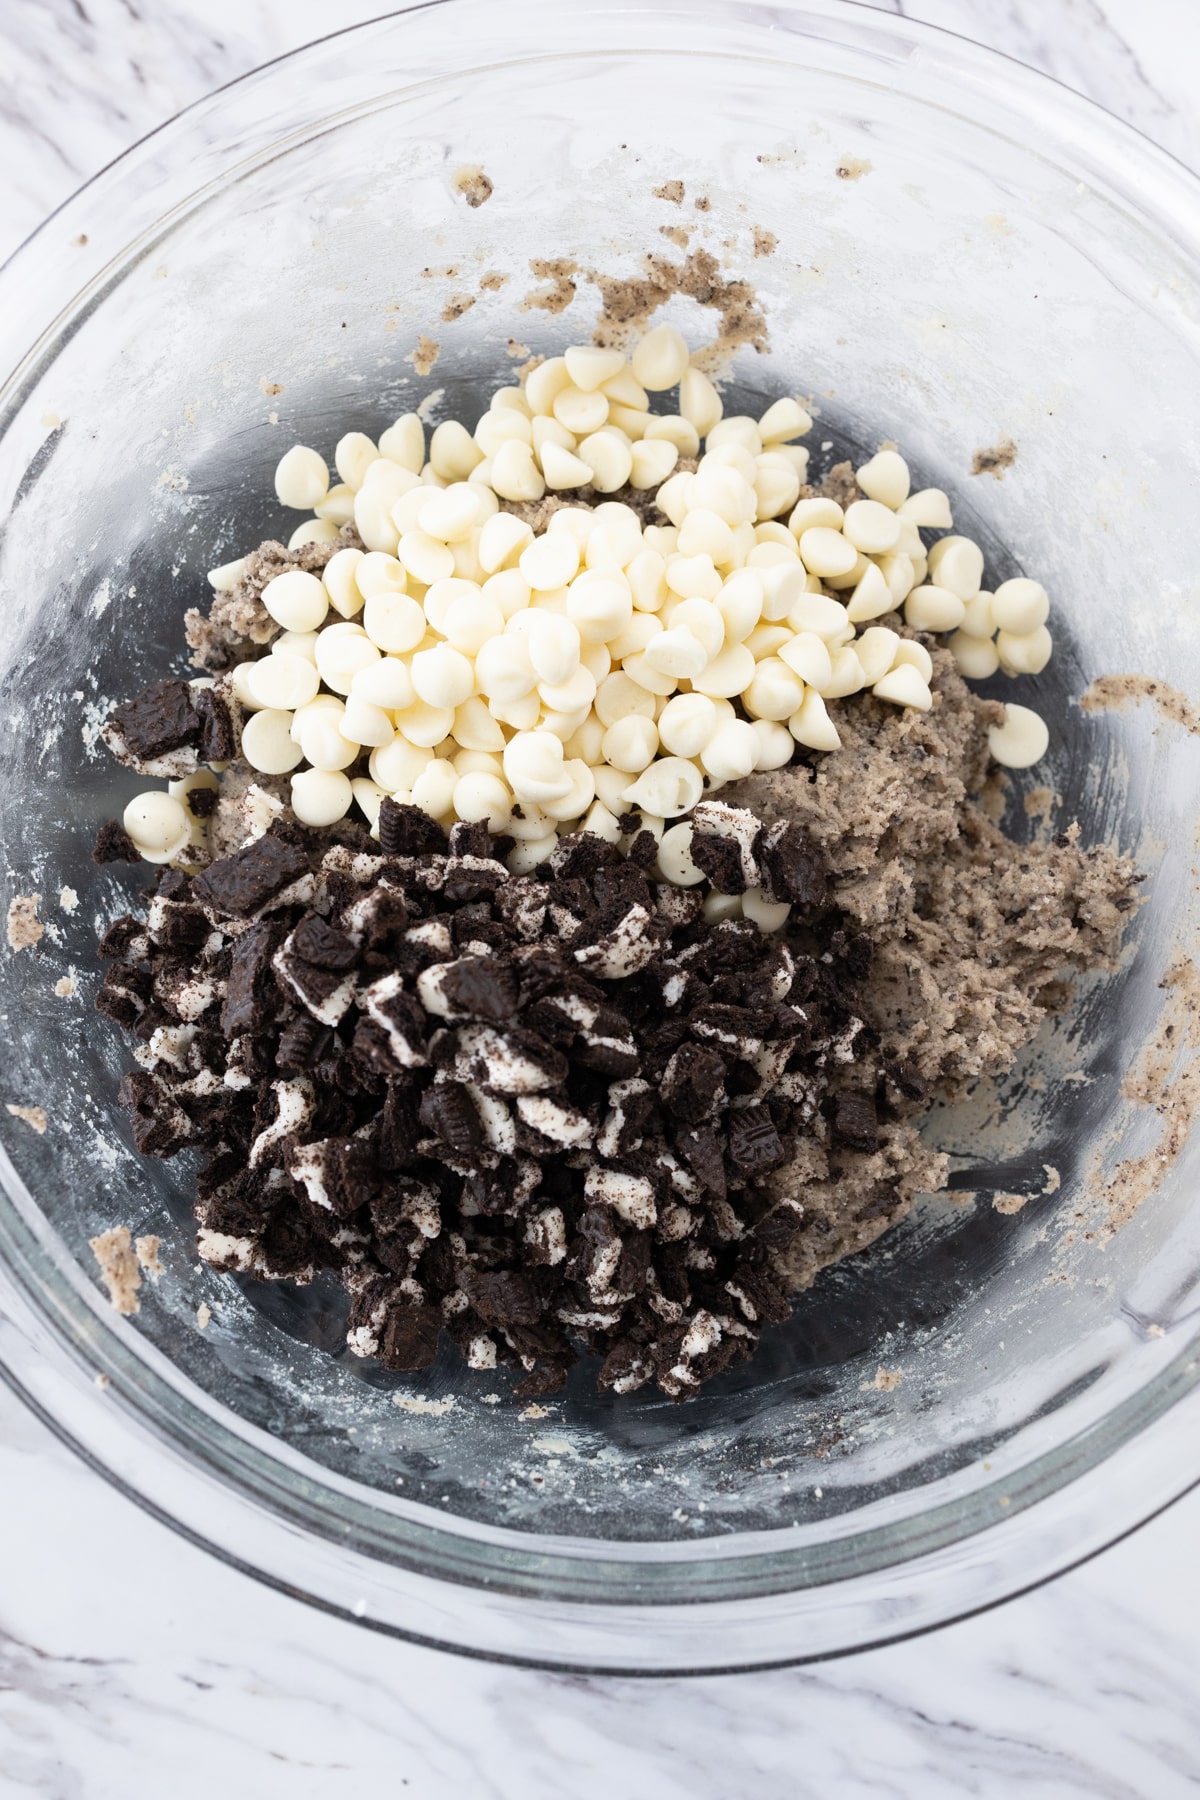 Top view of large mixing bowl with chopped oreos and white chocolate chips on top.